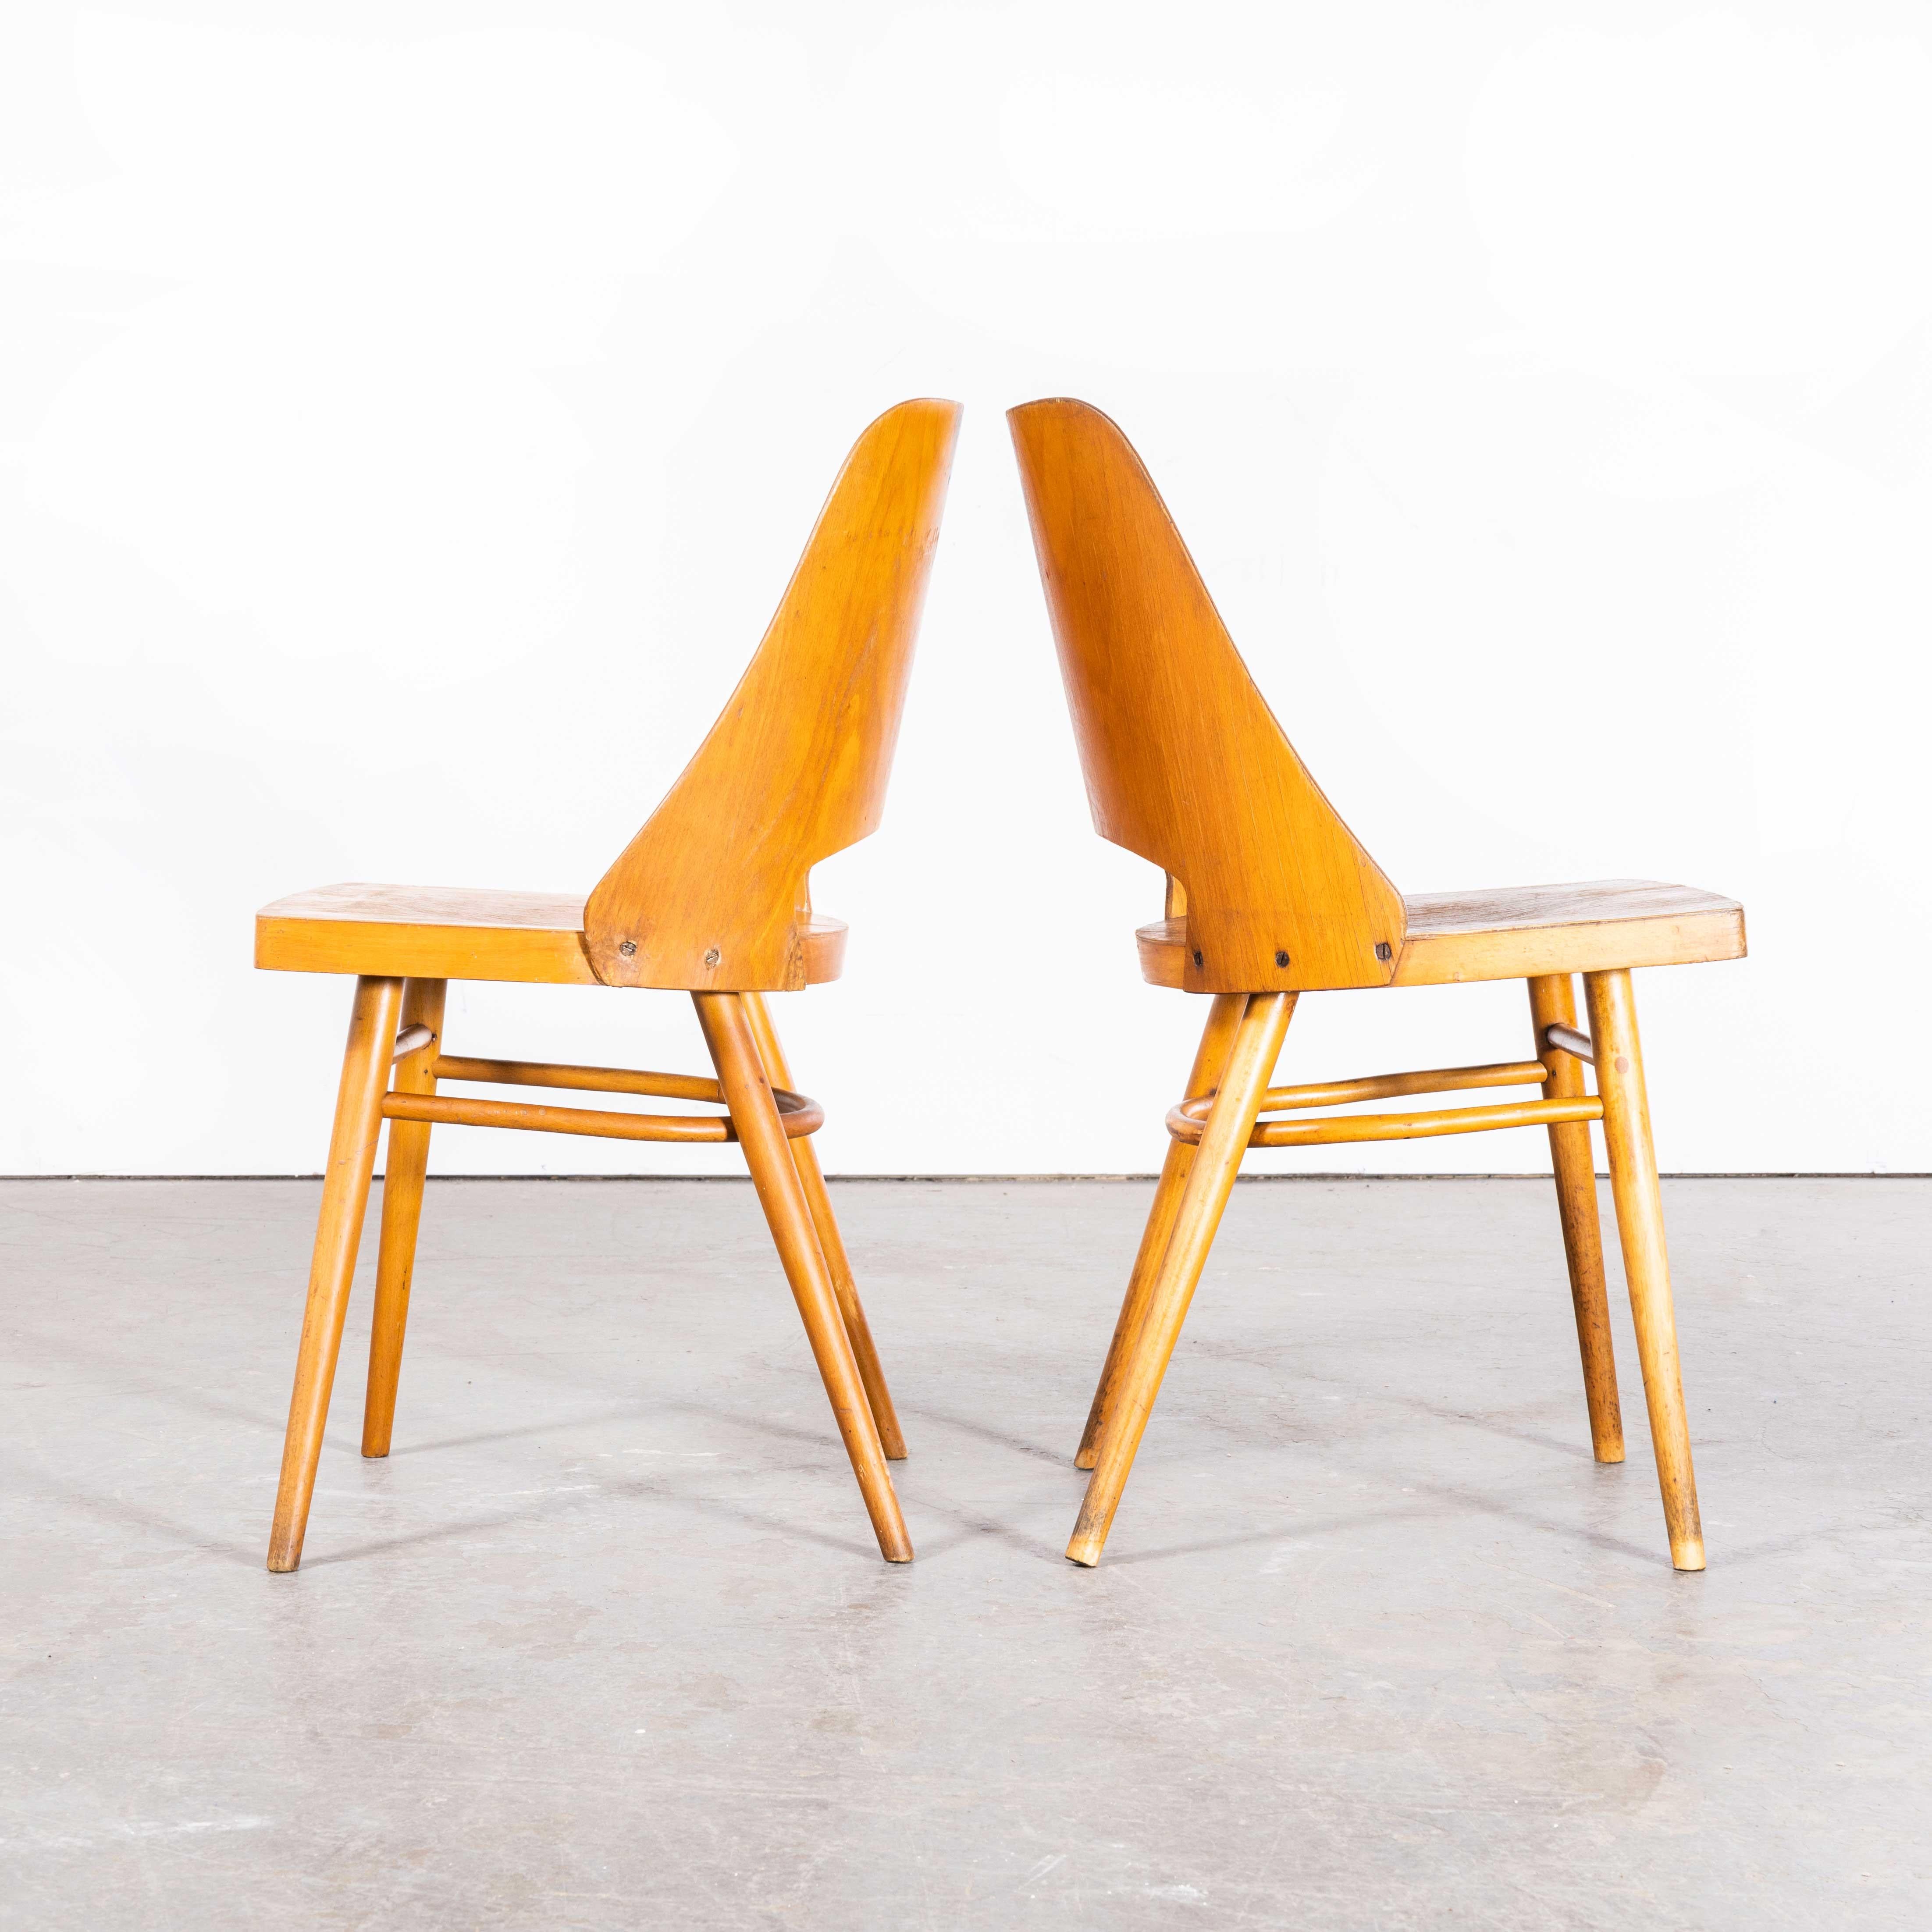 1950's Honey Beech Dining Chairs By Radomir Hoffman For Ton - Pair In Good Condition For Sale In Hook, Hampshire